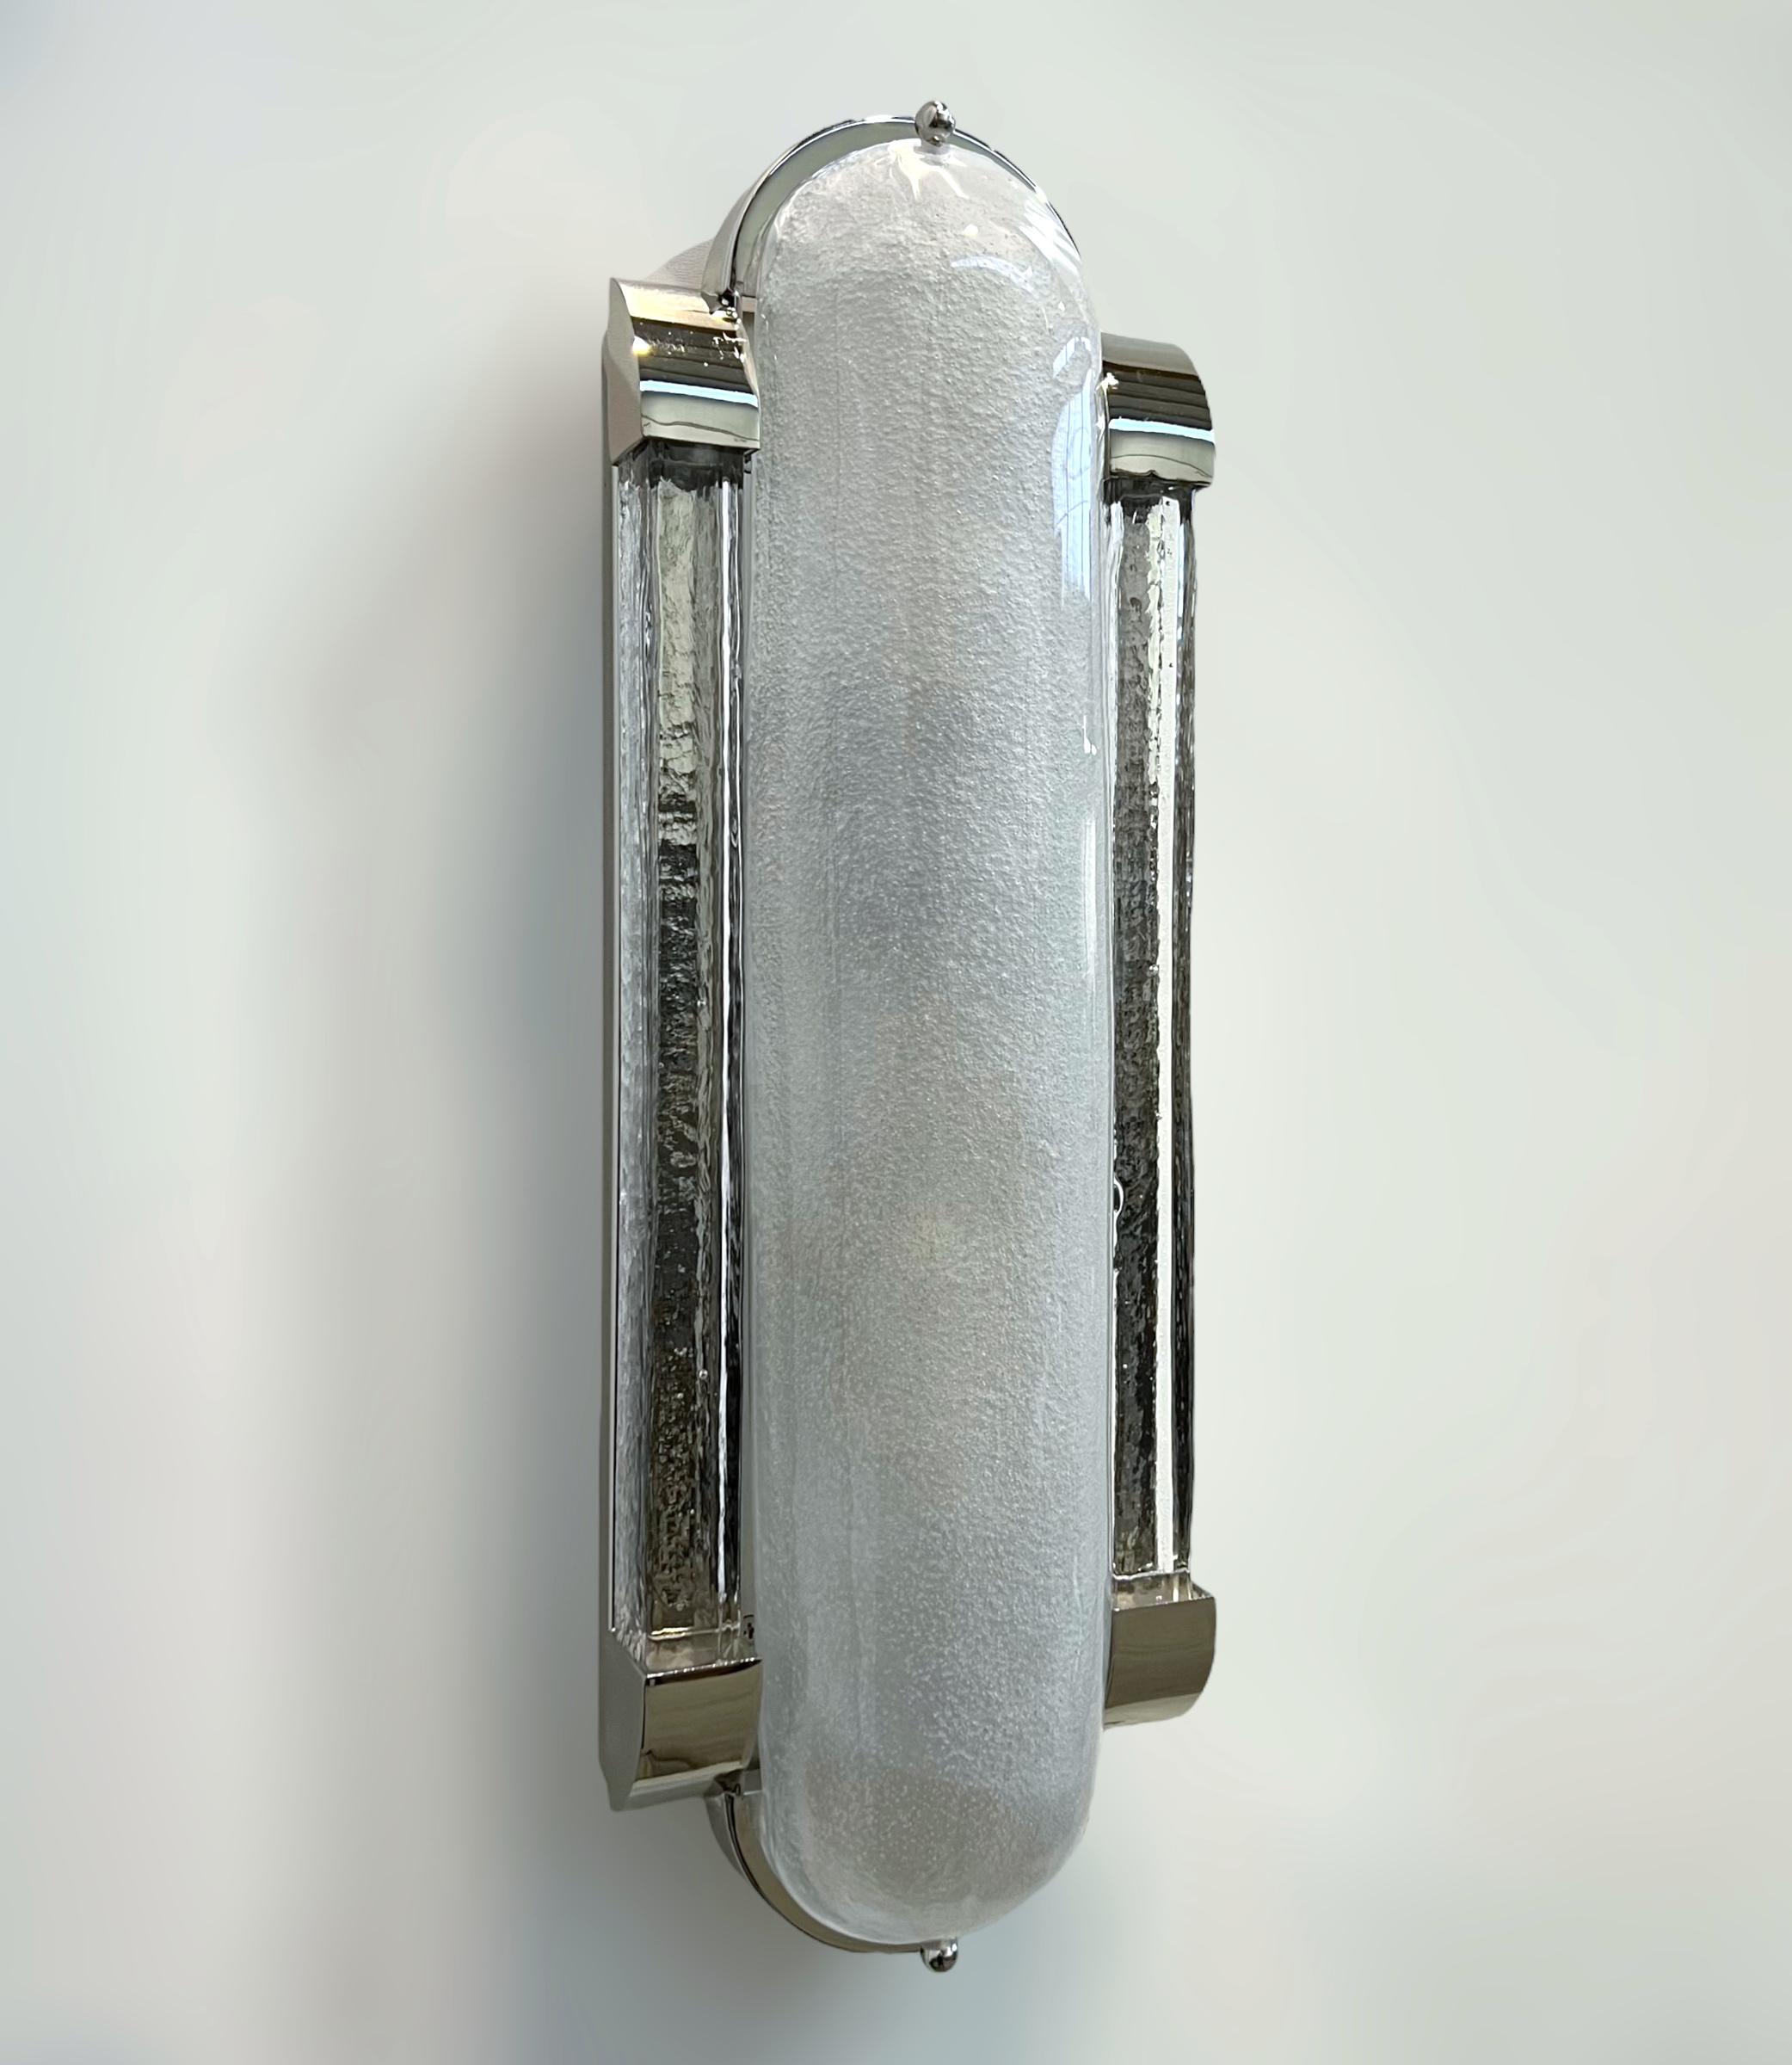 Italian Art Deco style wall light or flushmount with frosted Murano glass mounted on polished nickel frame with a full backplate / Designed by Fabio Bergomi for Fabio Ltd / Made in Italy
Measures: Height 18.5 inches, width 6.5 inches, depth 3